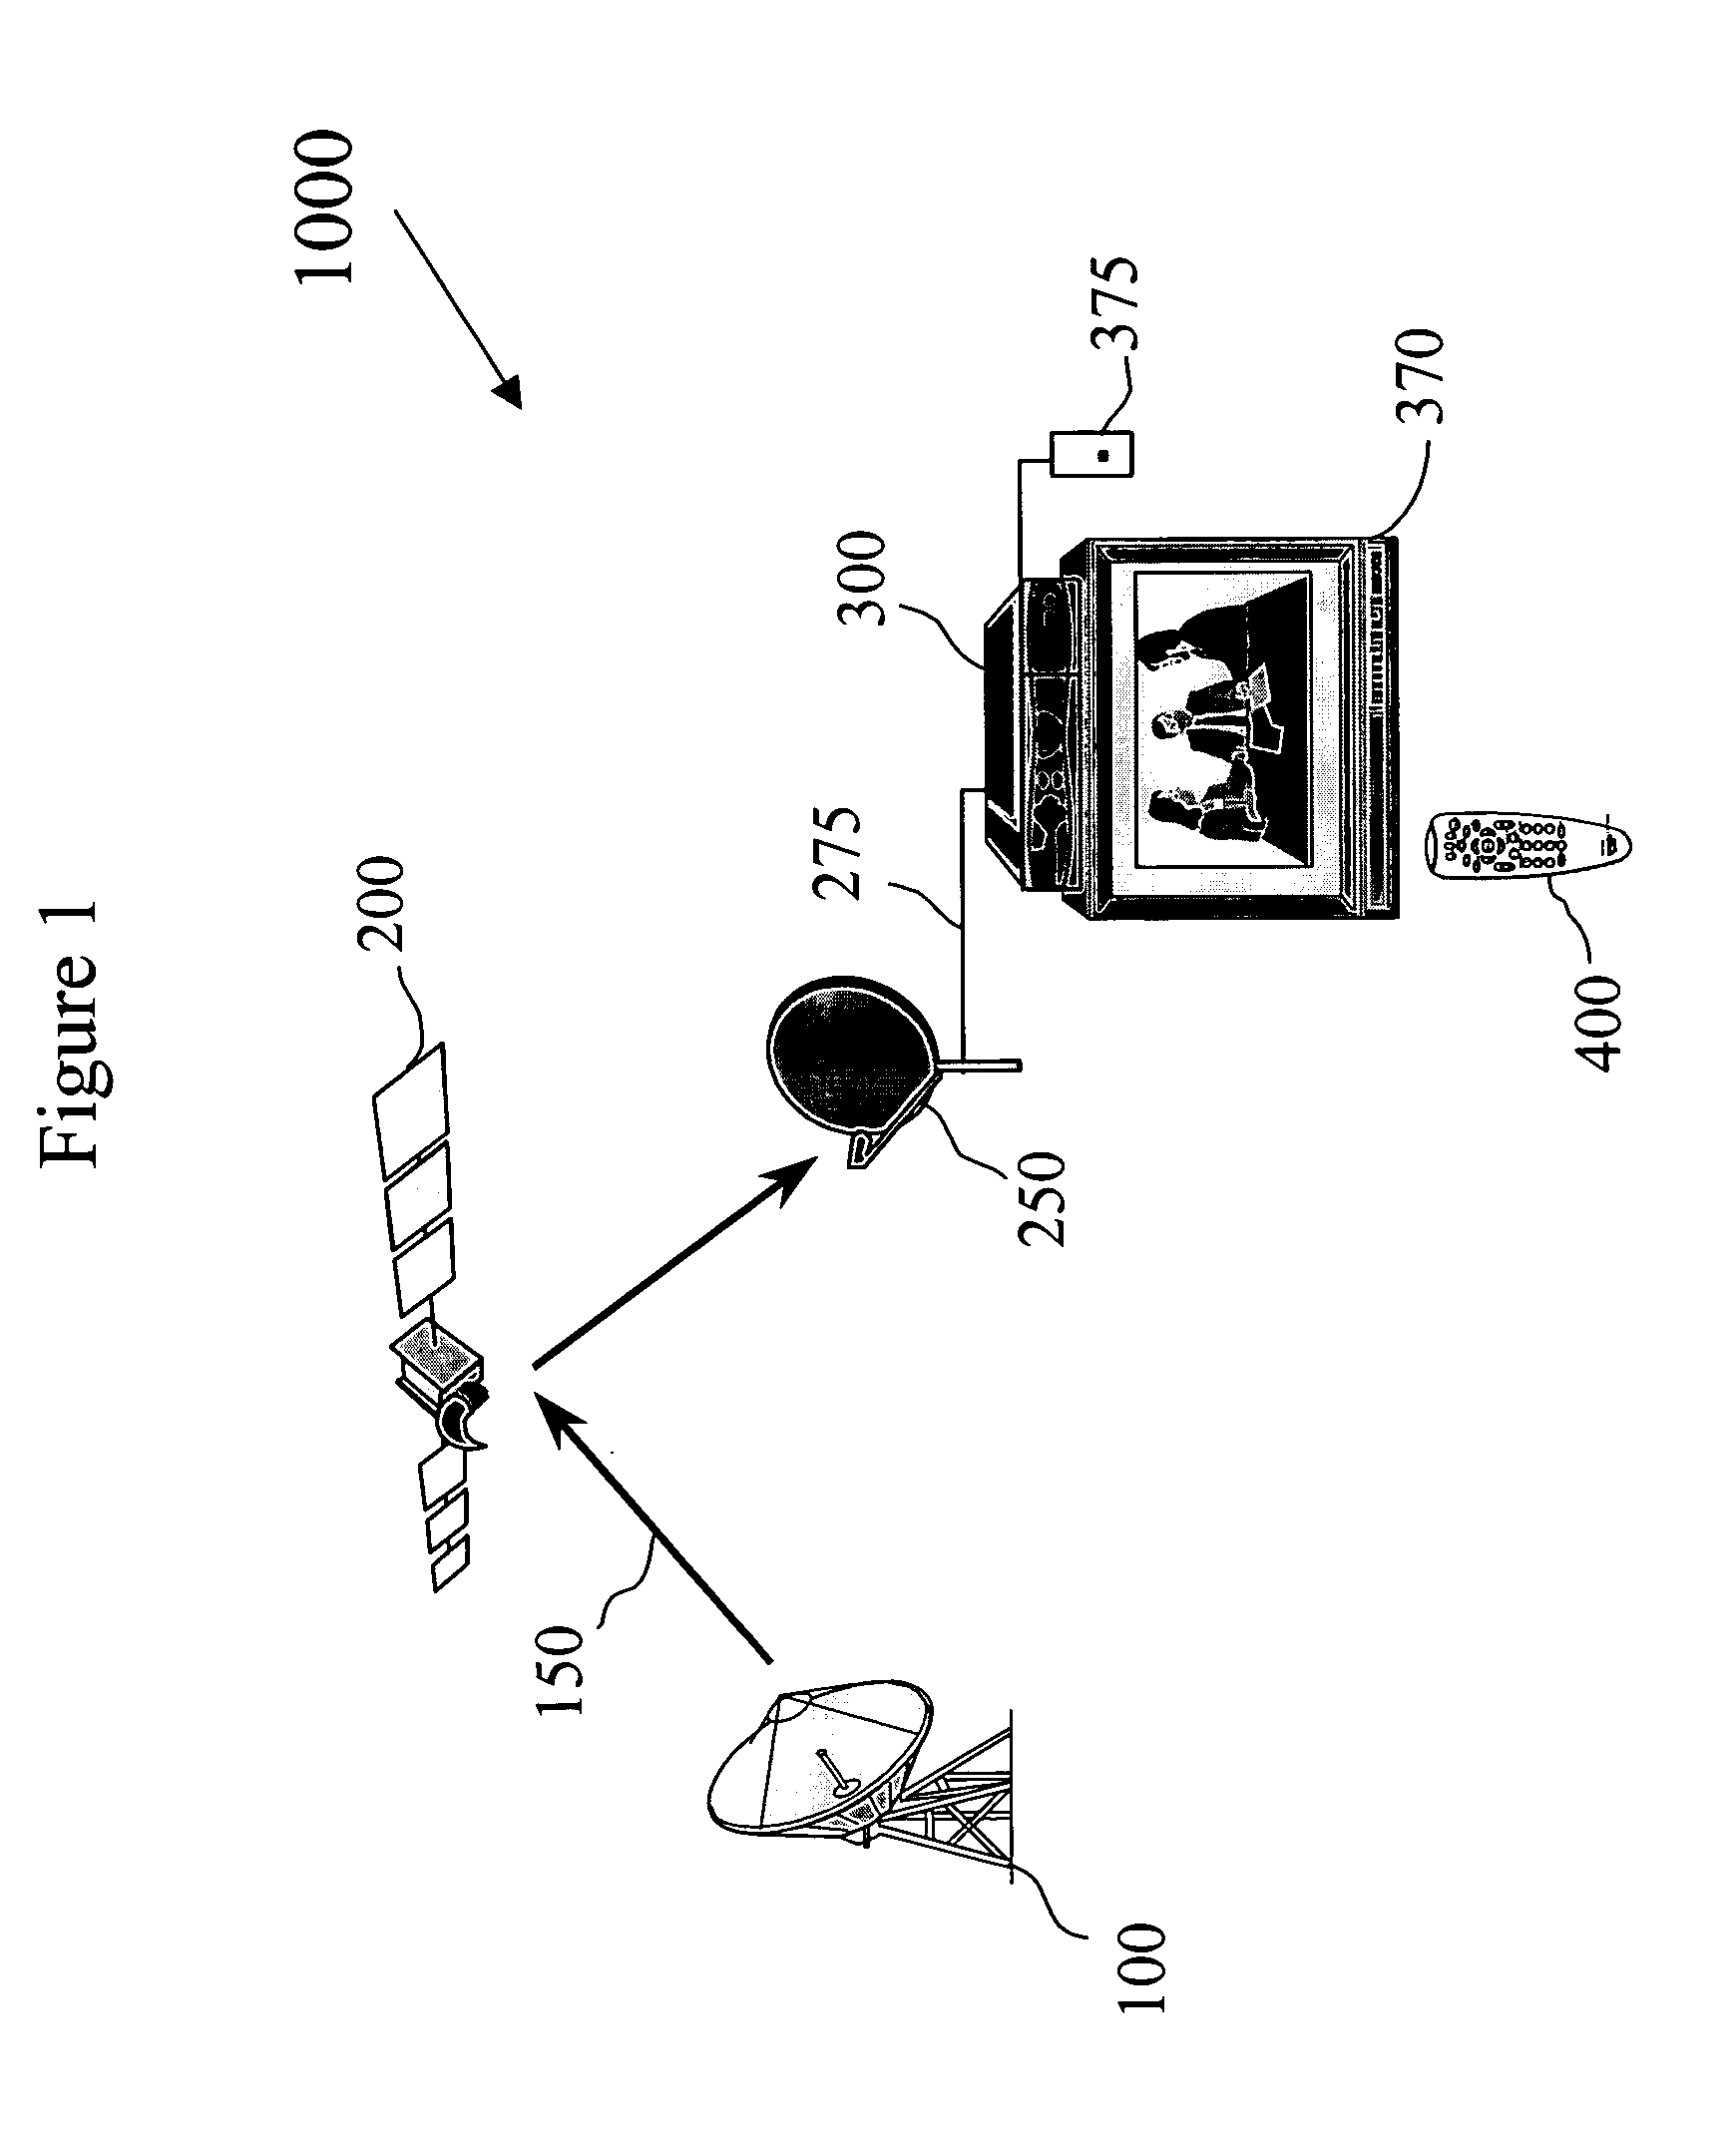 Method and apparatus for background caching of encrypted programming data for later playback